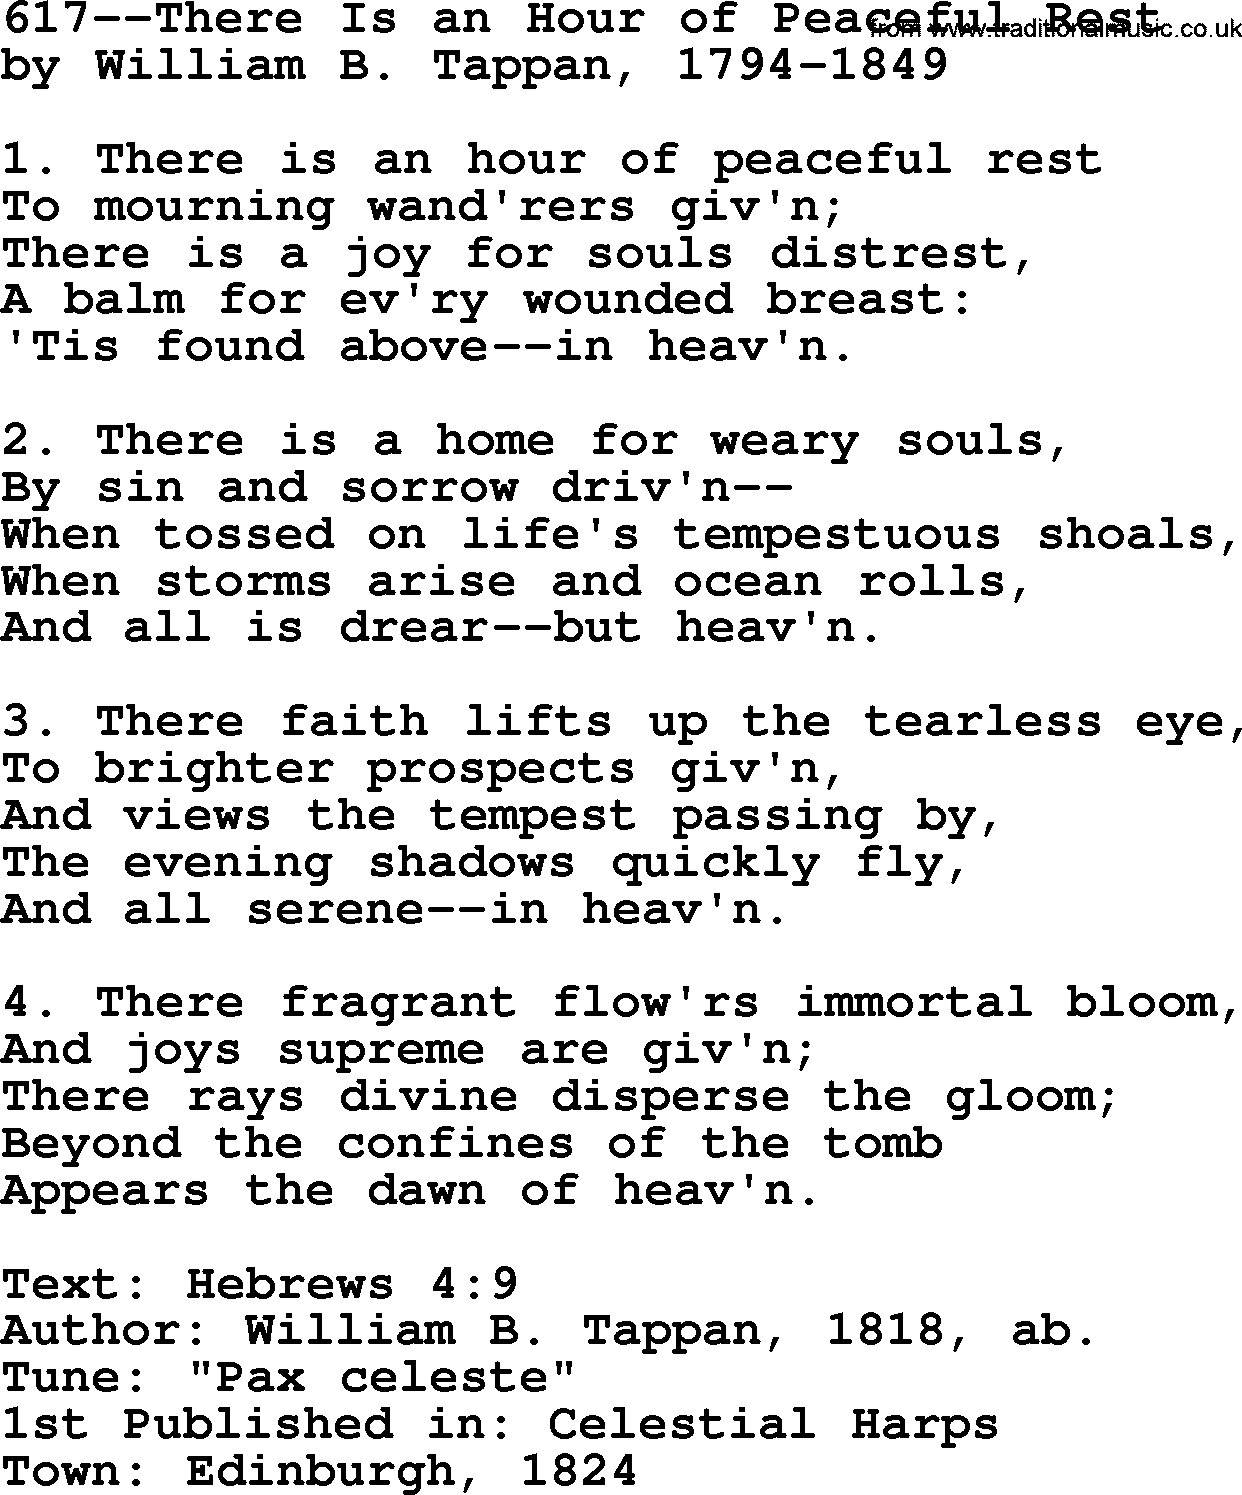 Lutheran Hymn: 617--There Is an Hour of Peaceful Rest.txt lyrics with PDF